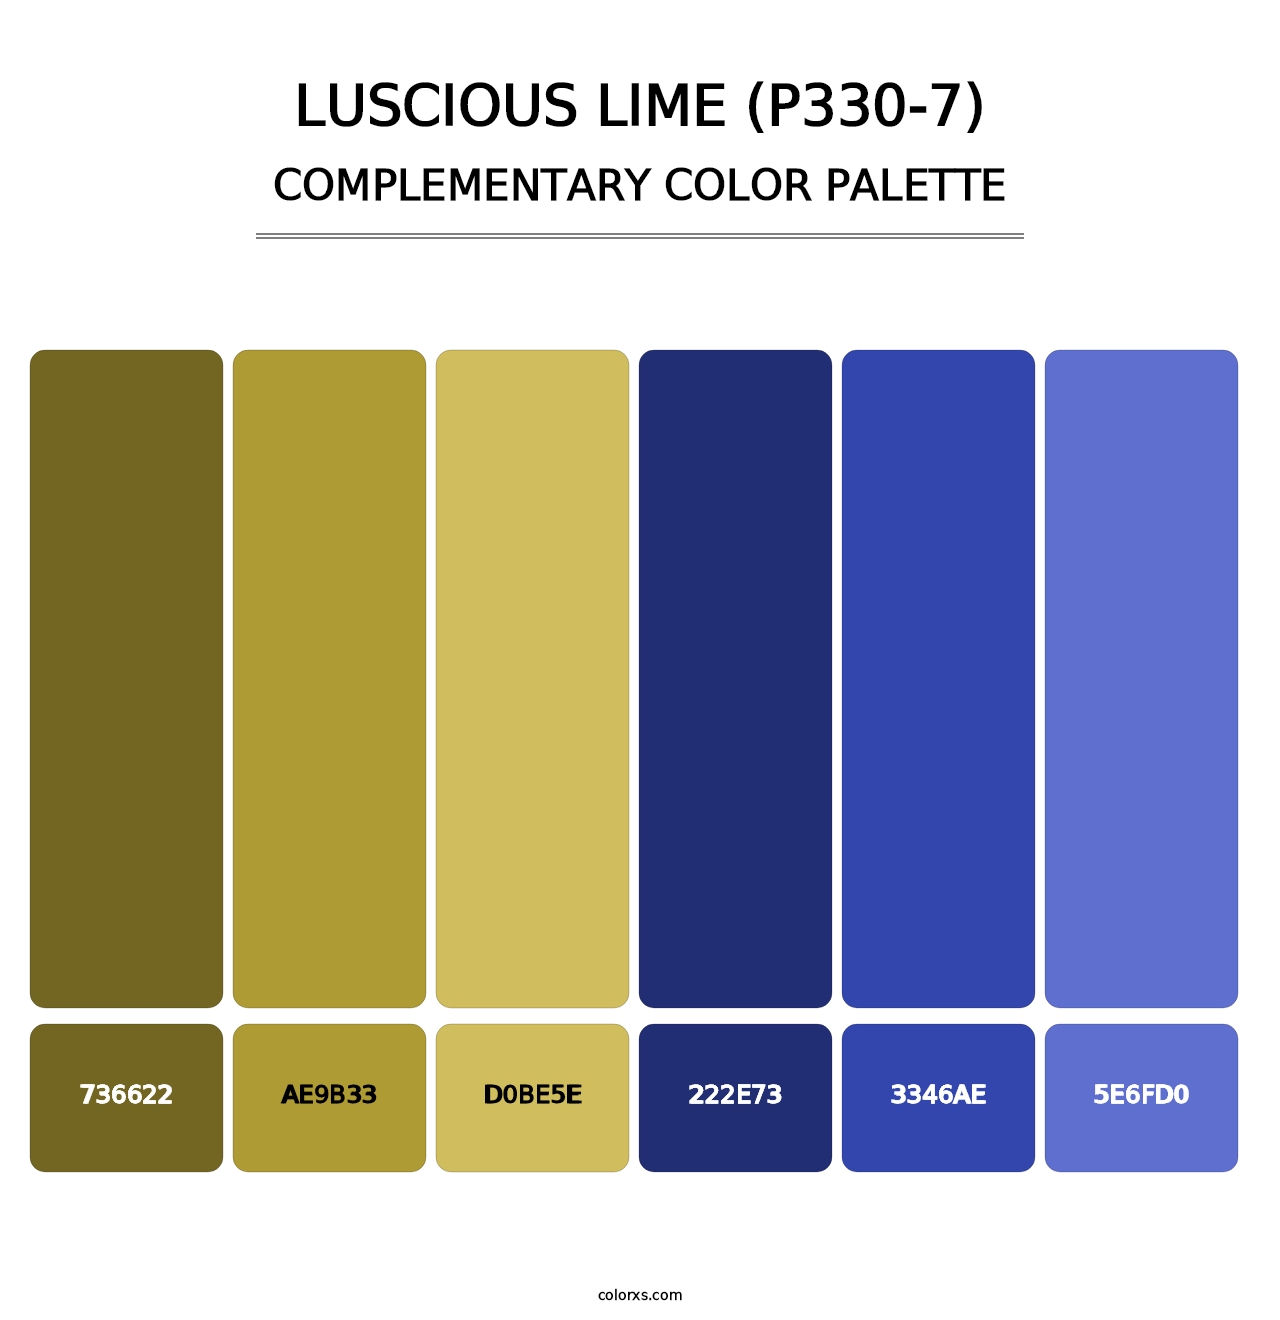 Luscious Lime (P330-7) - Complementary Color Palette